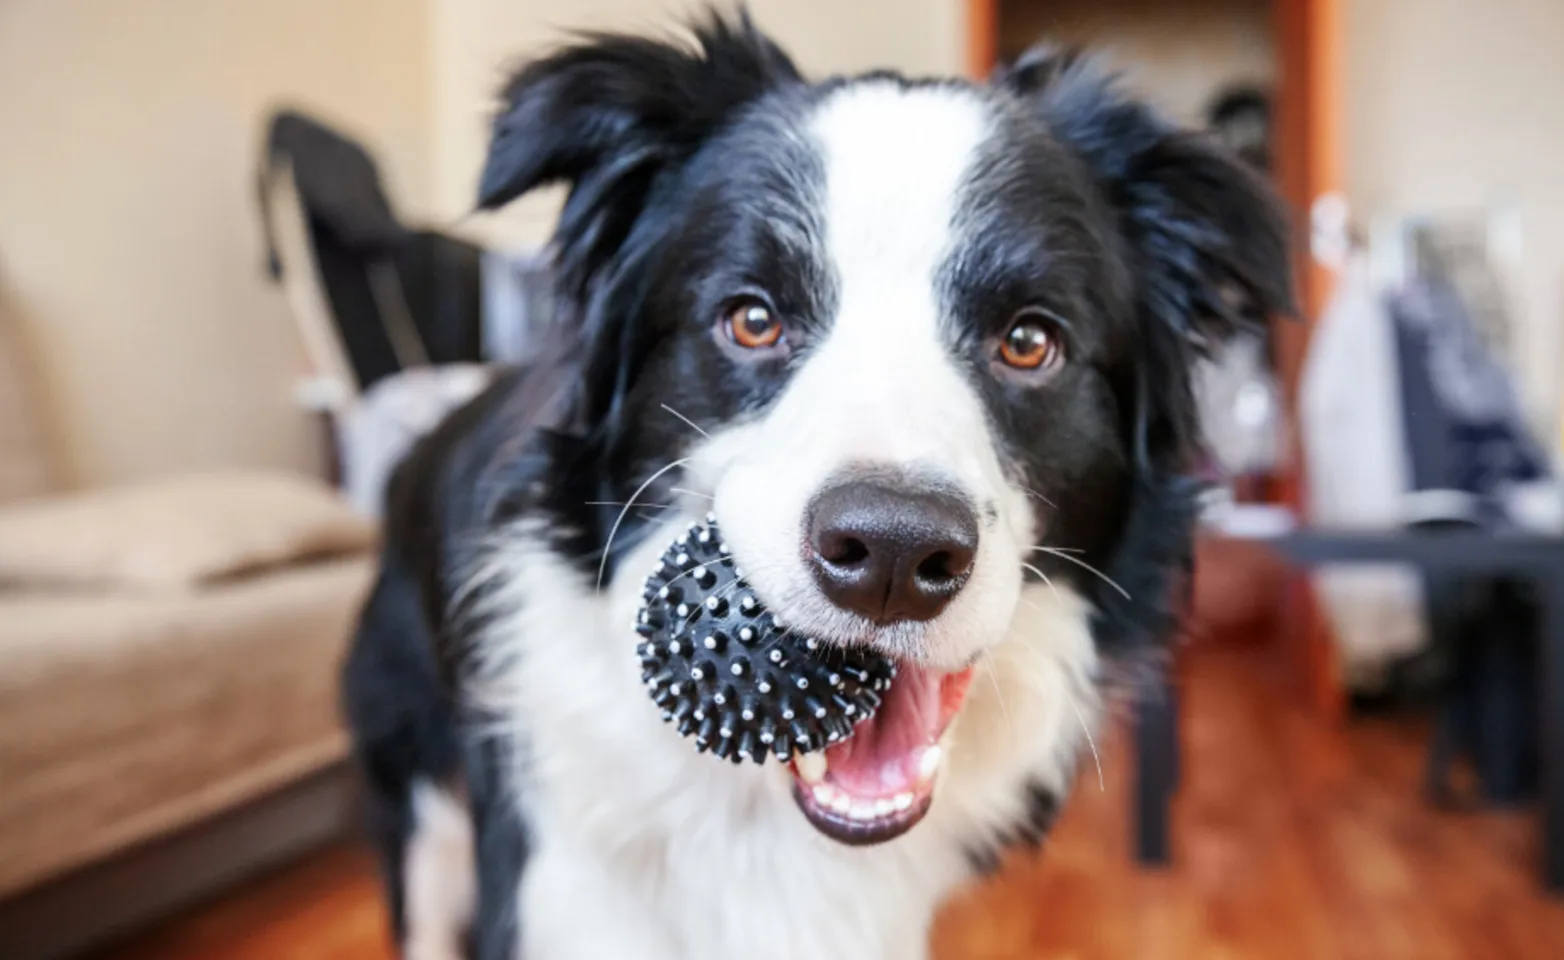 Dog holding a ball in his mouth